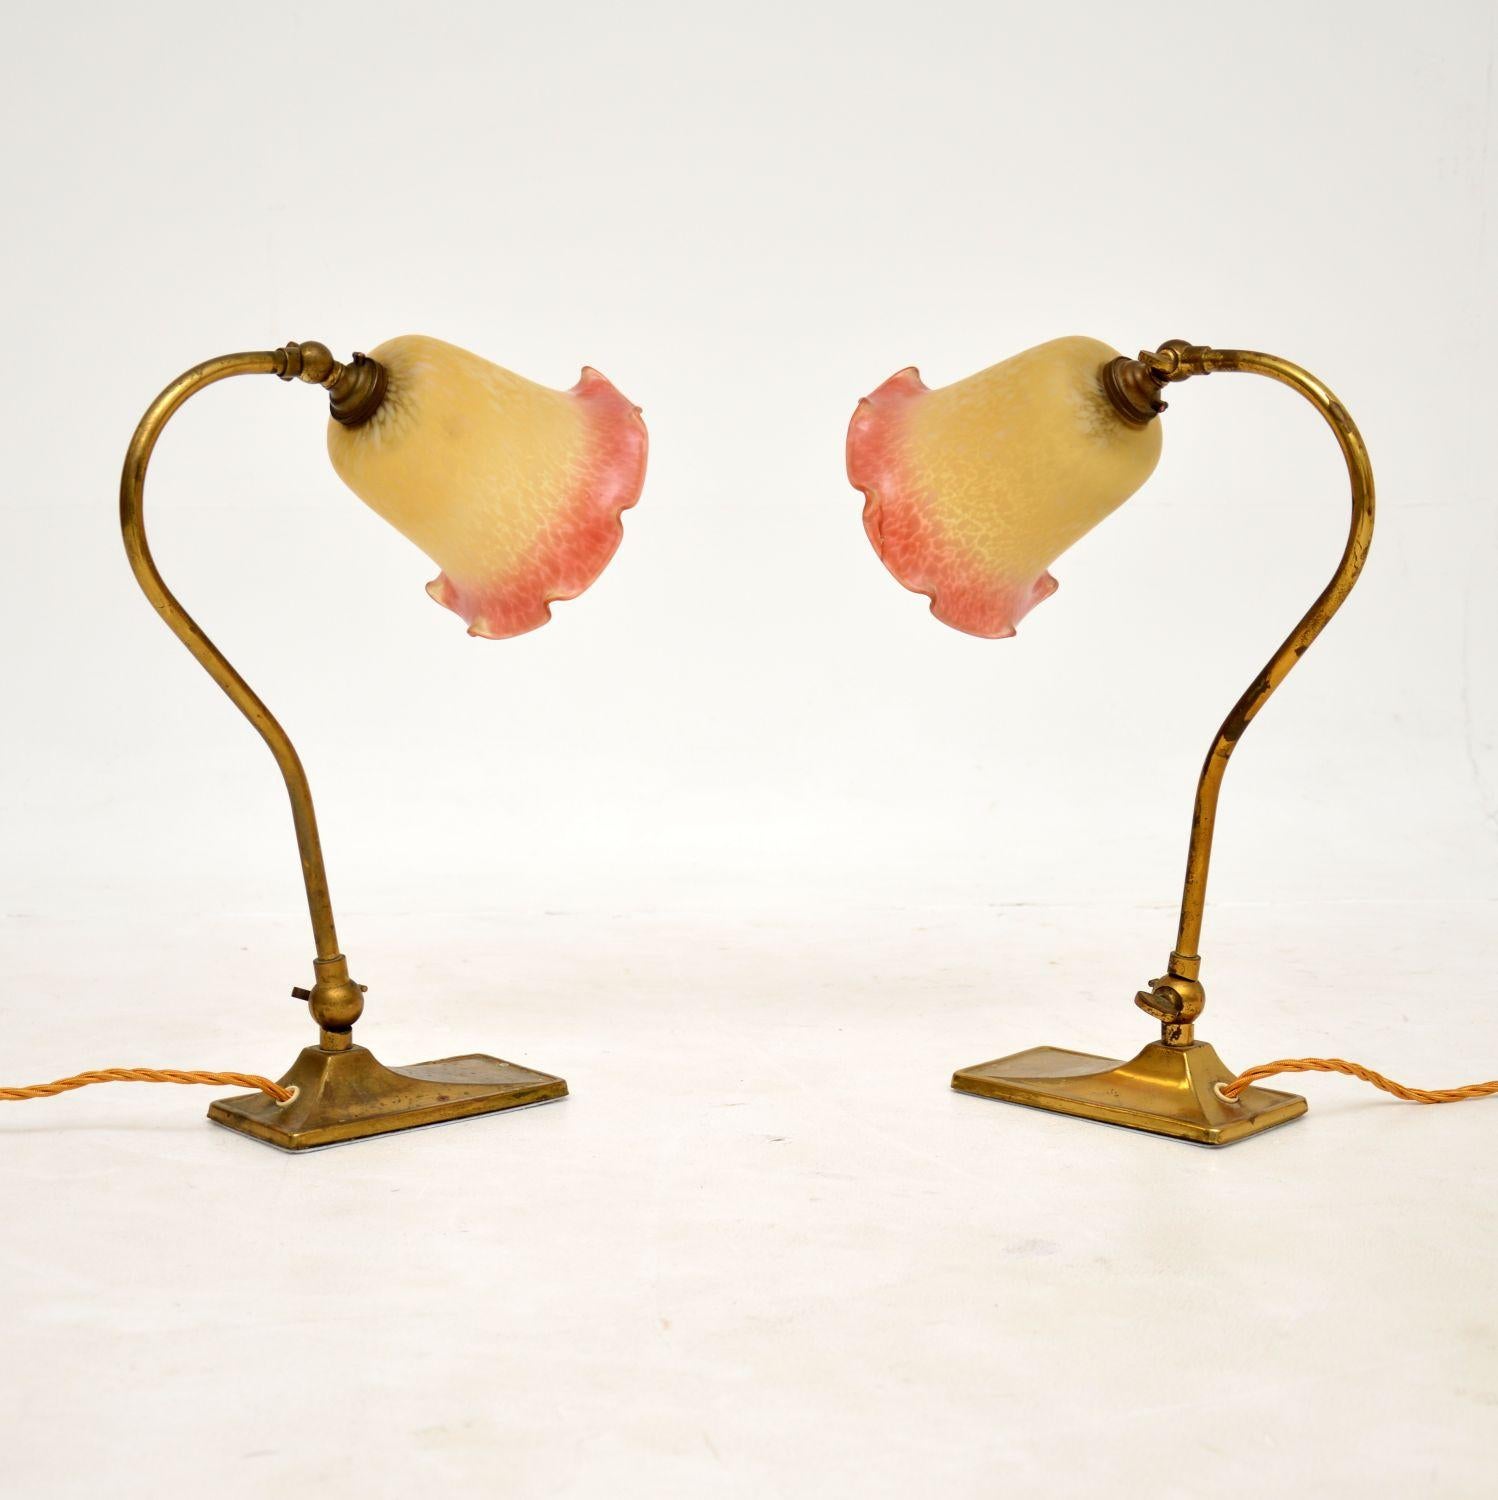 A gorgeous pair of antique table lamps in solid brass with beautiful glass shades. They were made in England and date from around the 1920s.

They are of superb quality and are a lovely size. They are adjustable at the bases and neck, they can be